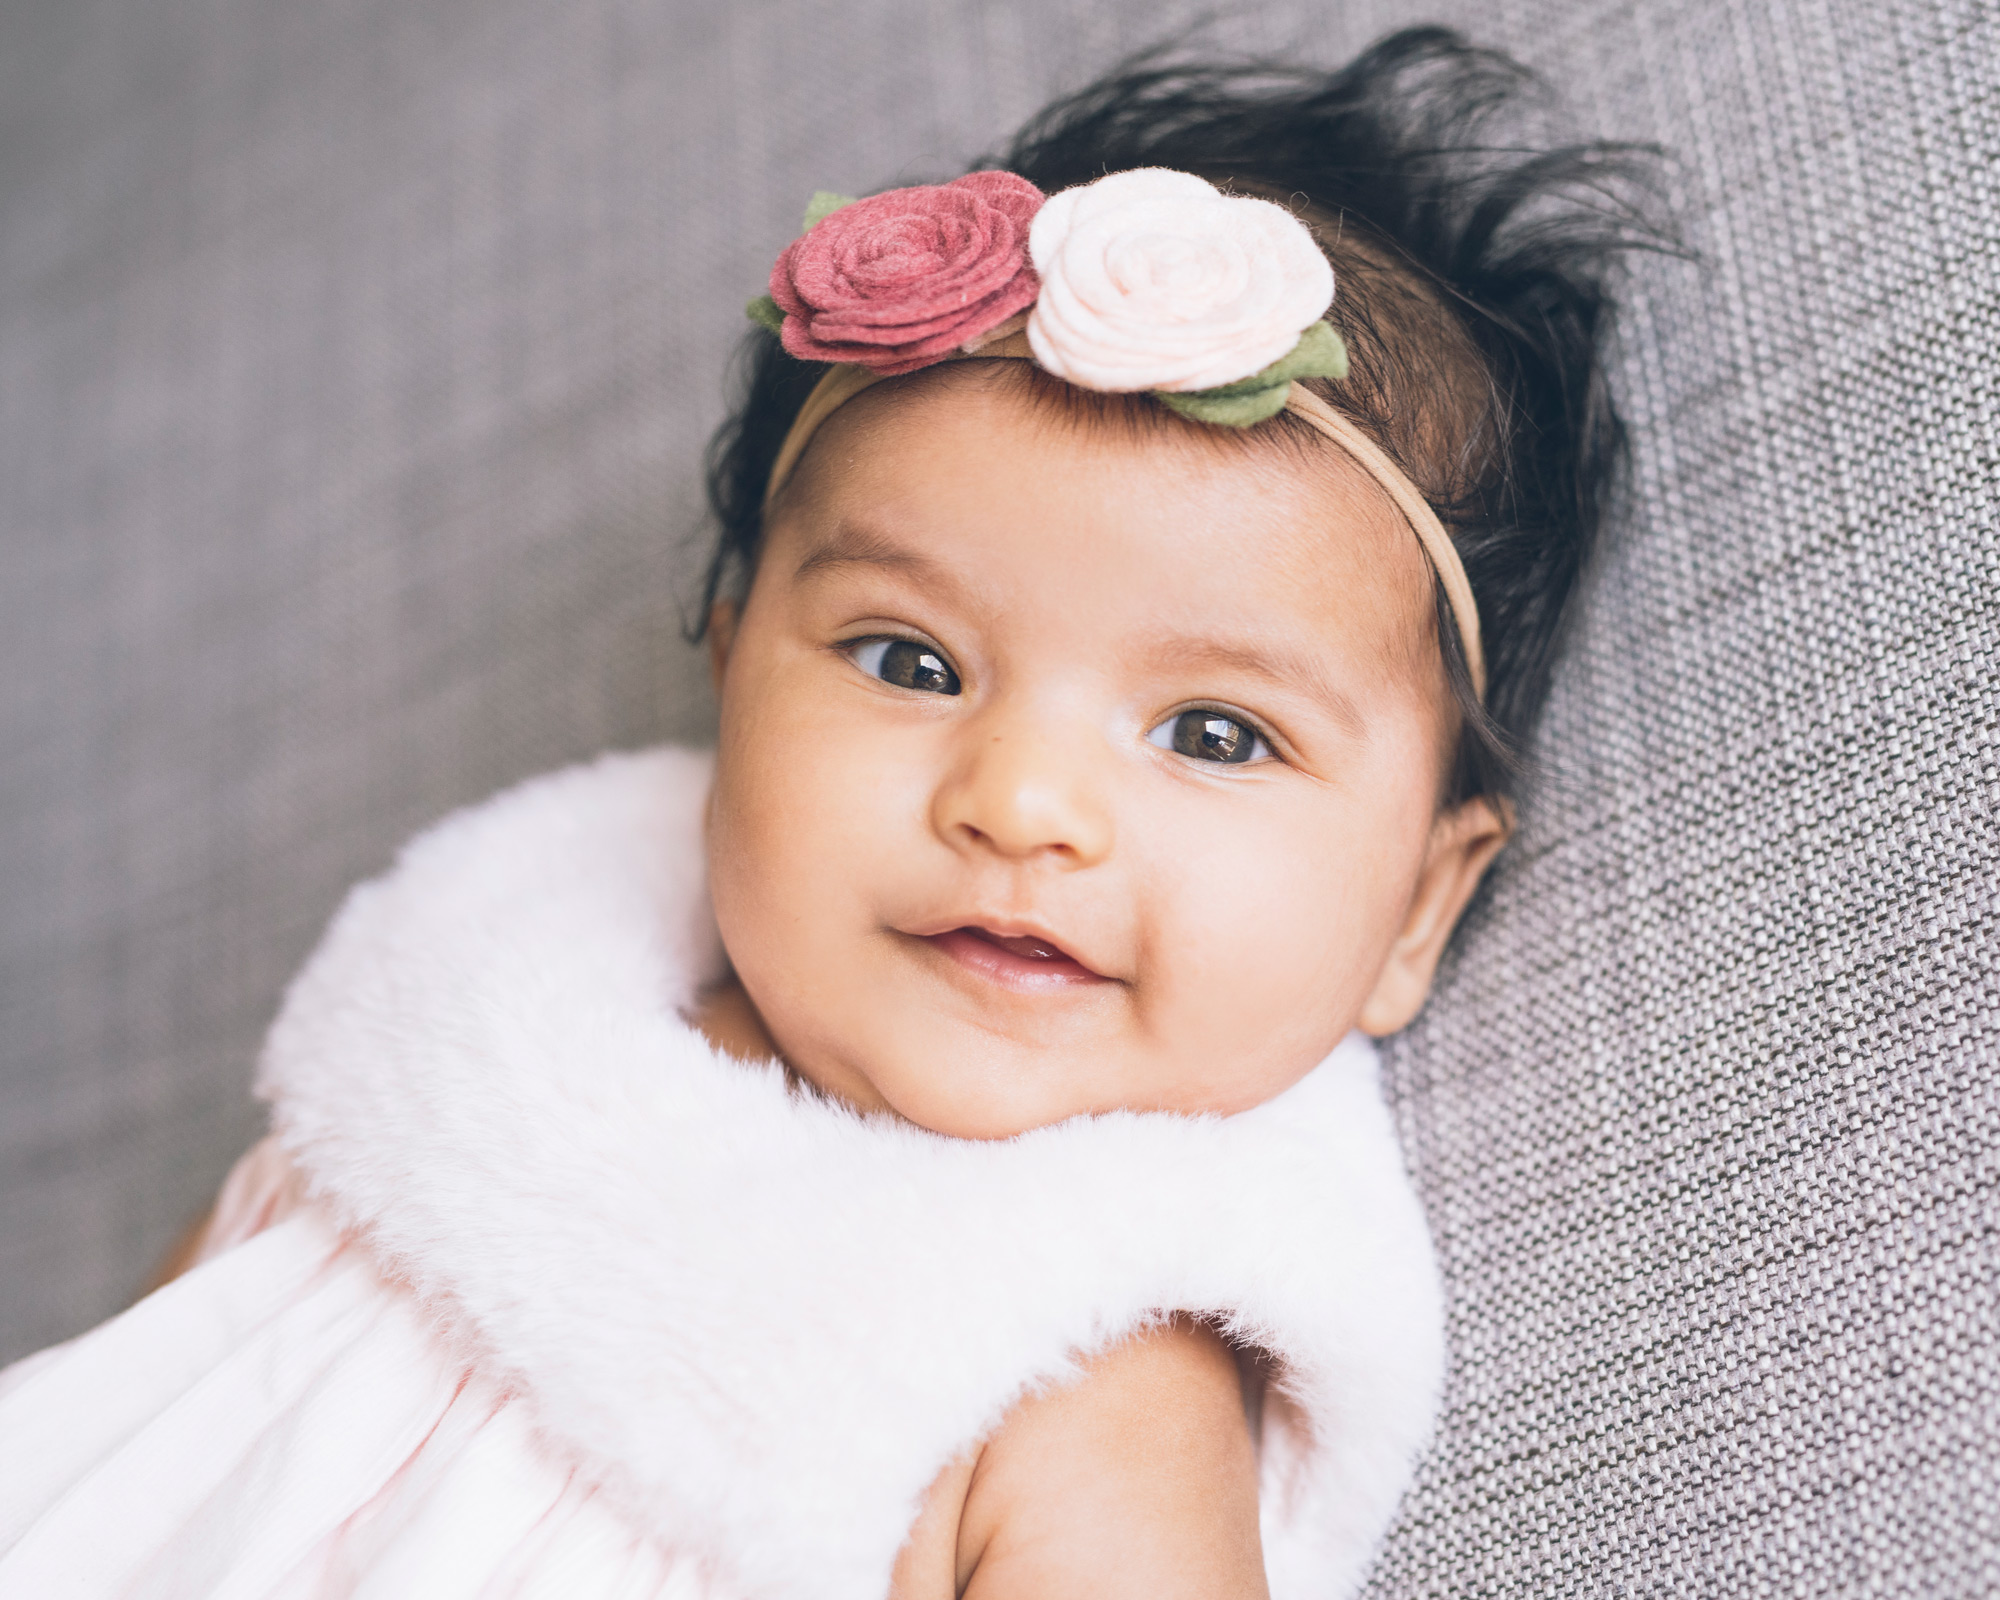 baby-girl-with-flower-headband-looking-at-the-camera.jpg